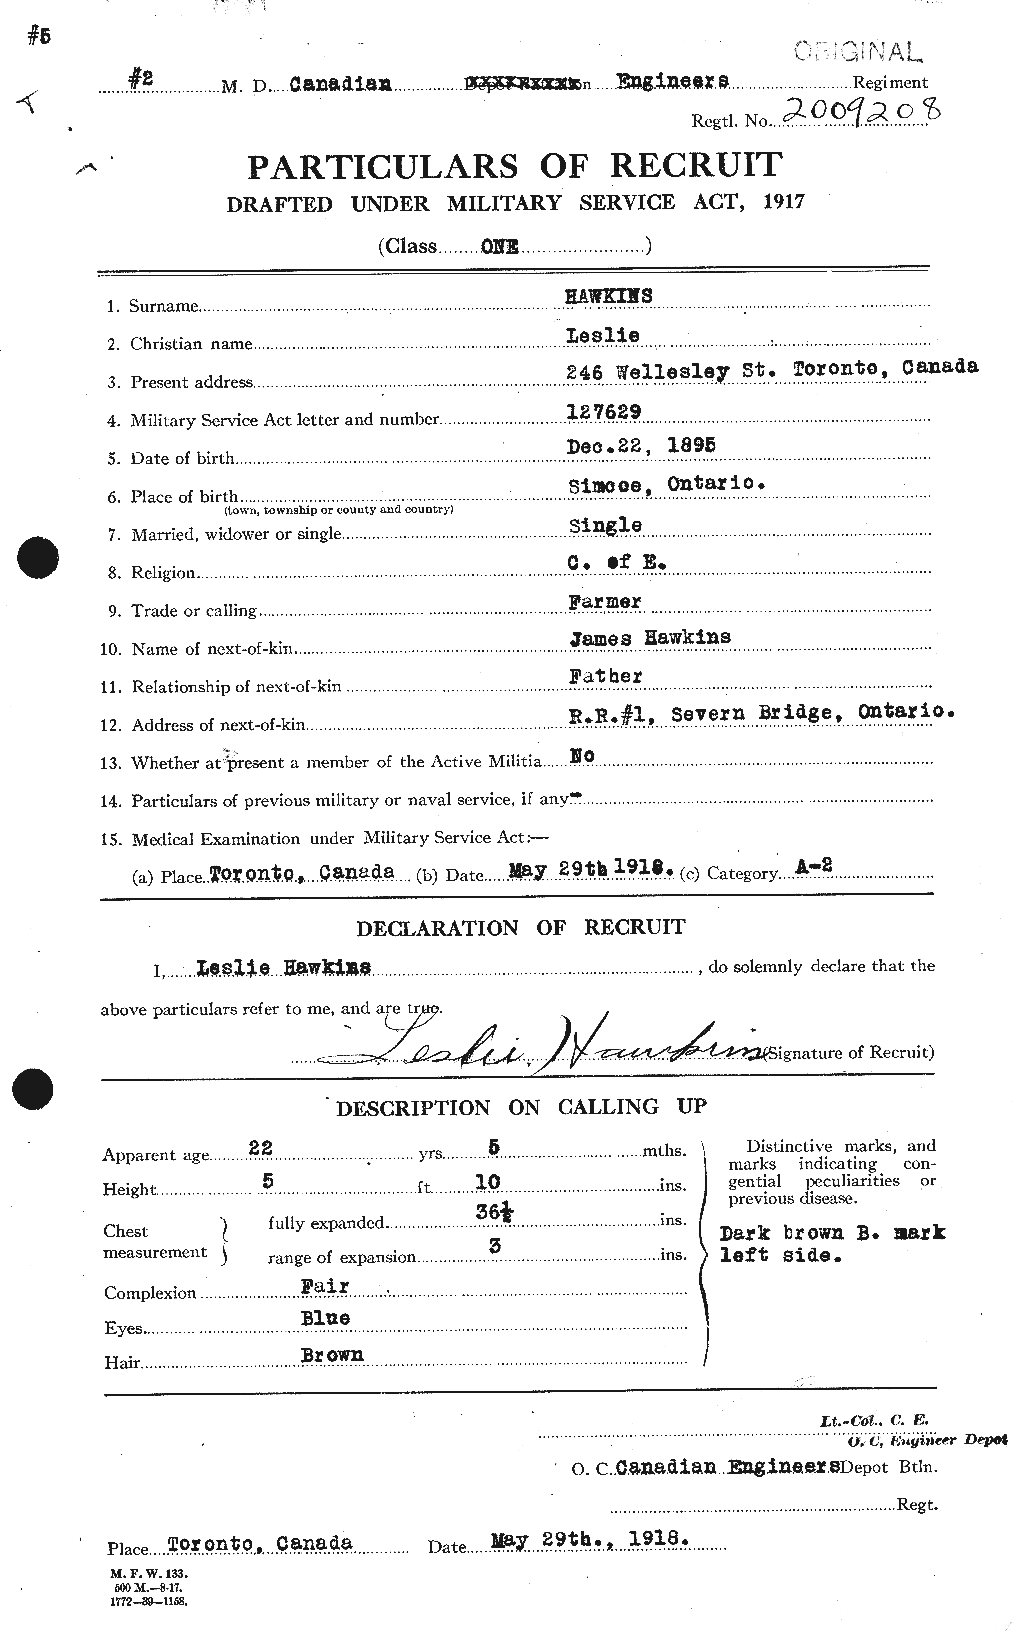 Personnel Records of the First World War - CEF 387206a